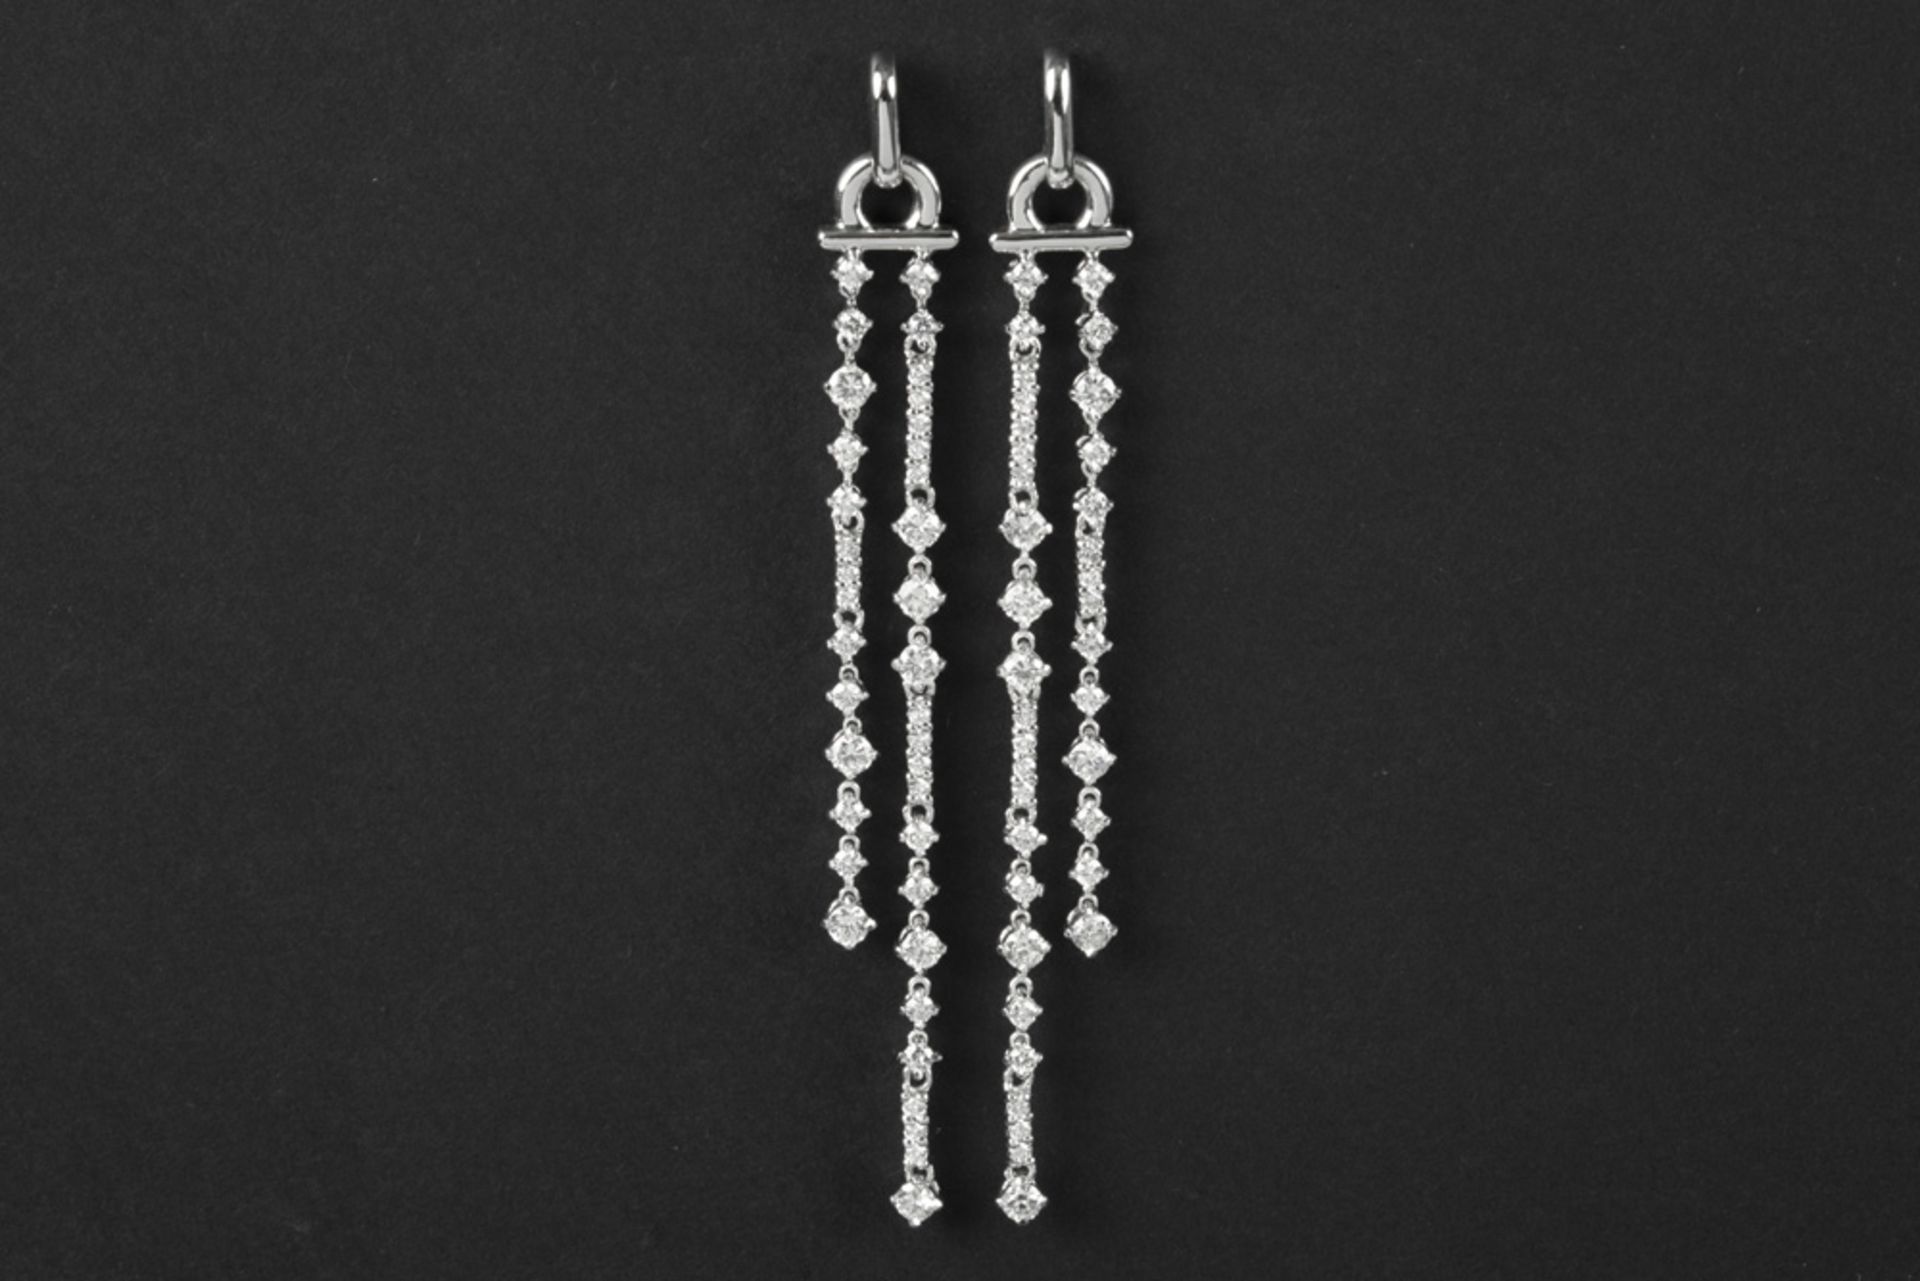 pair of earrings with an elegant model in white gold (18 carat) and at least 1,85 carat of very high